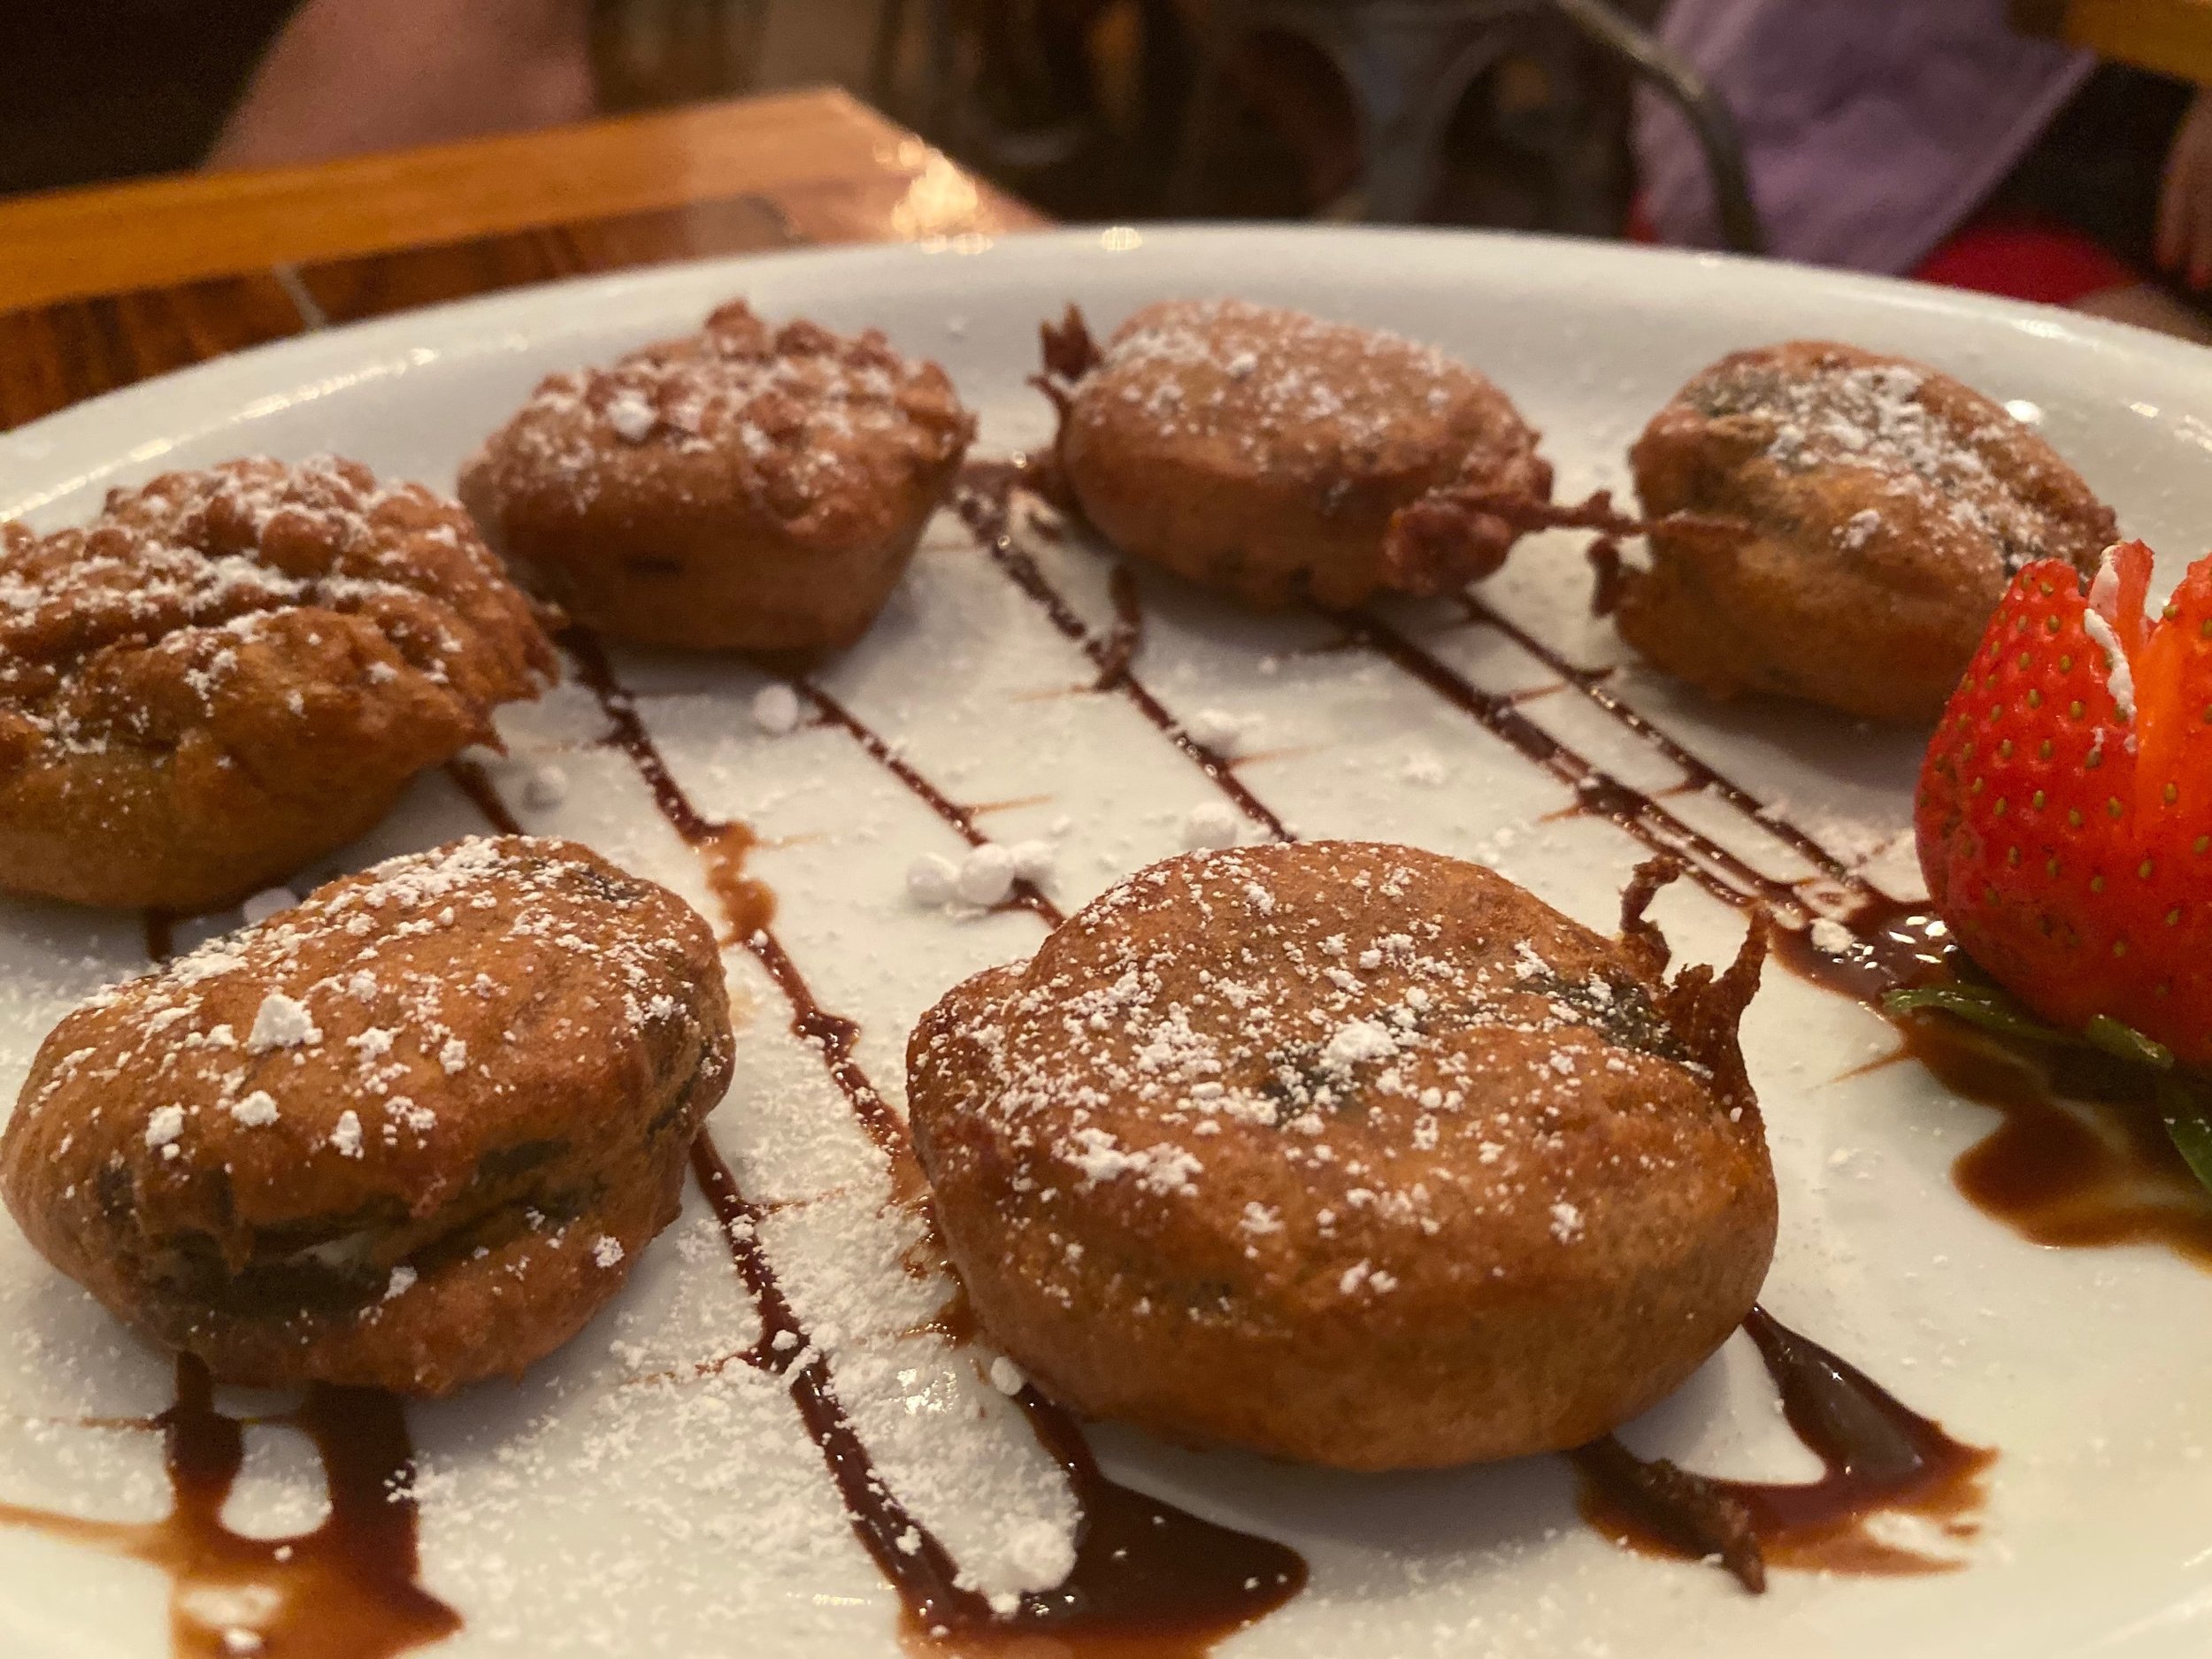 And these? These are fried Oreo’s.